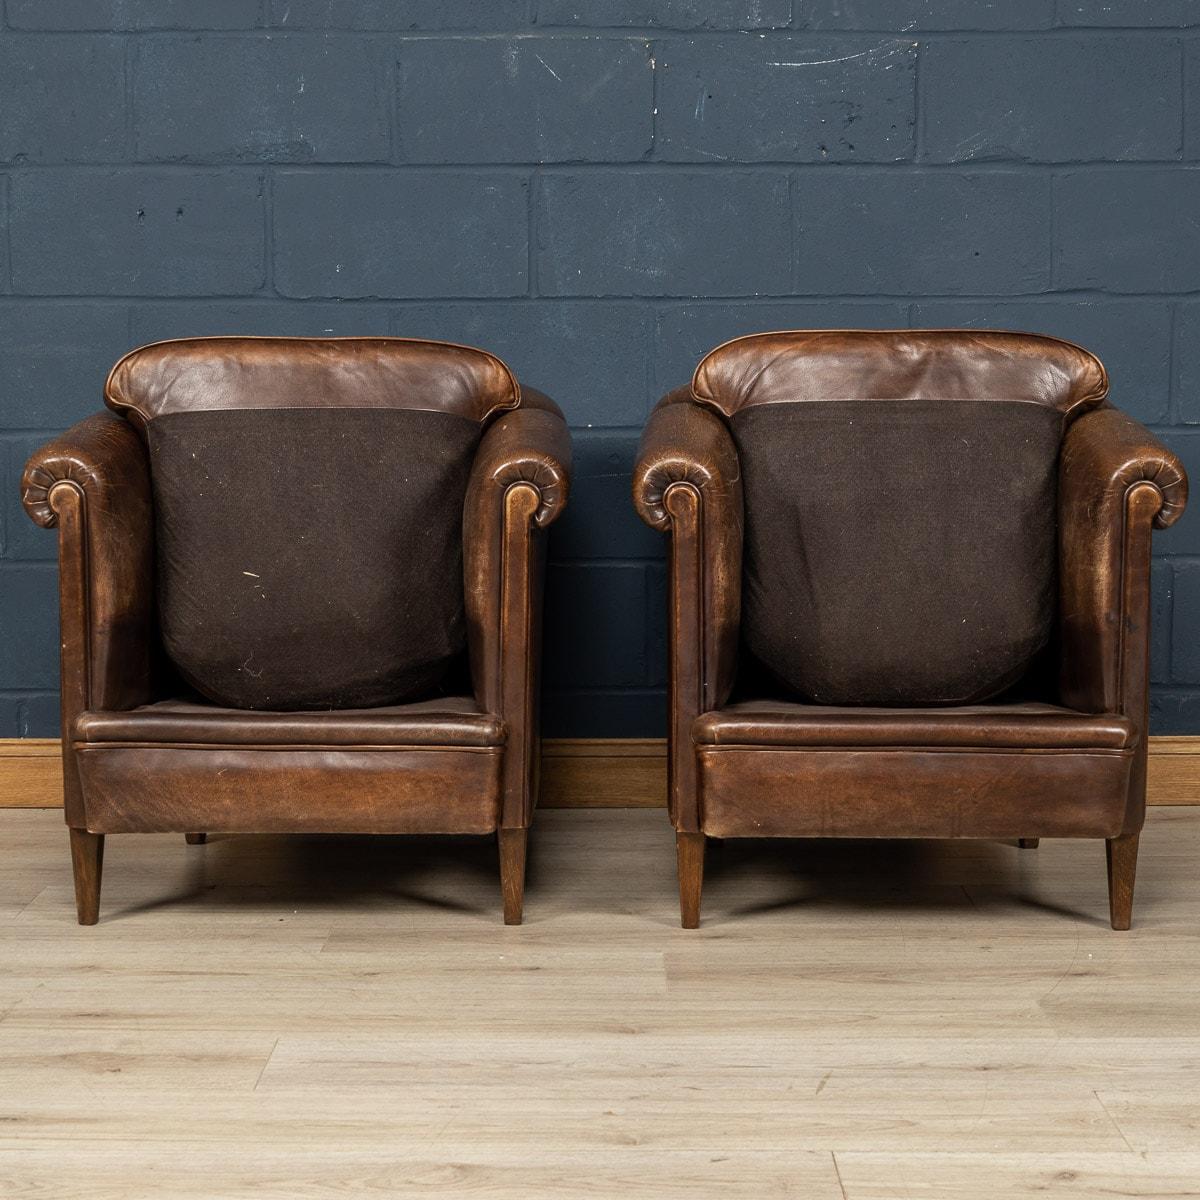 20th Century Dutch Sheepskin Leather Tub Chairs In Good Condition For Sale In Royal Tunbridge Wells, Kent